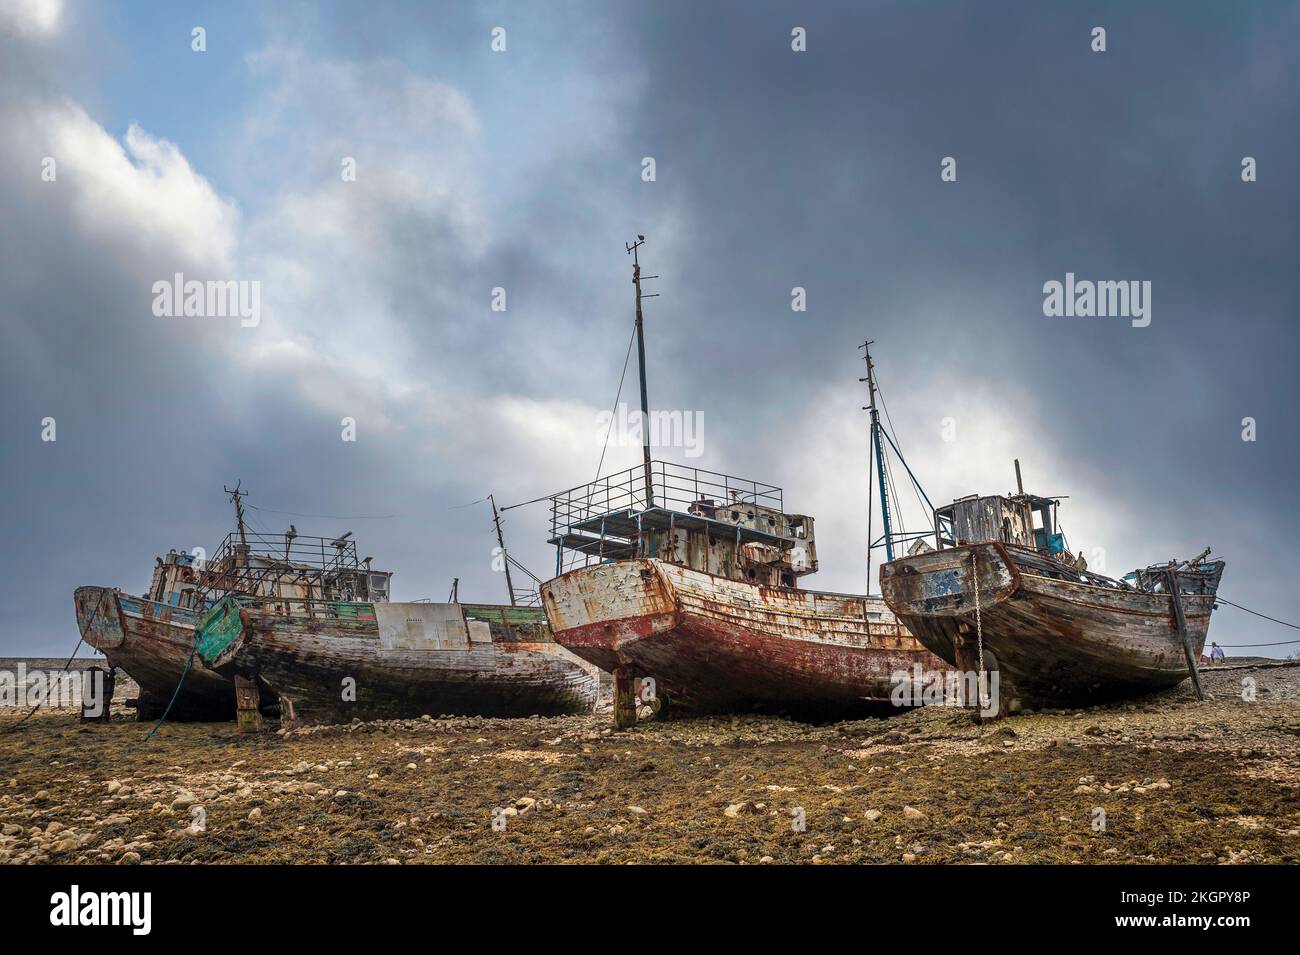 France, Brittany, Camaret-sur-Mer, Clouds over ship cemetery Stock Photo